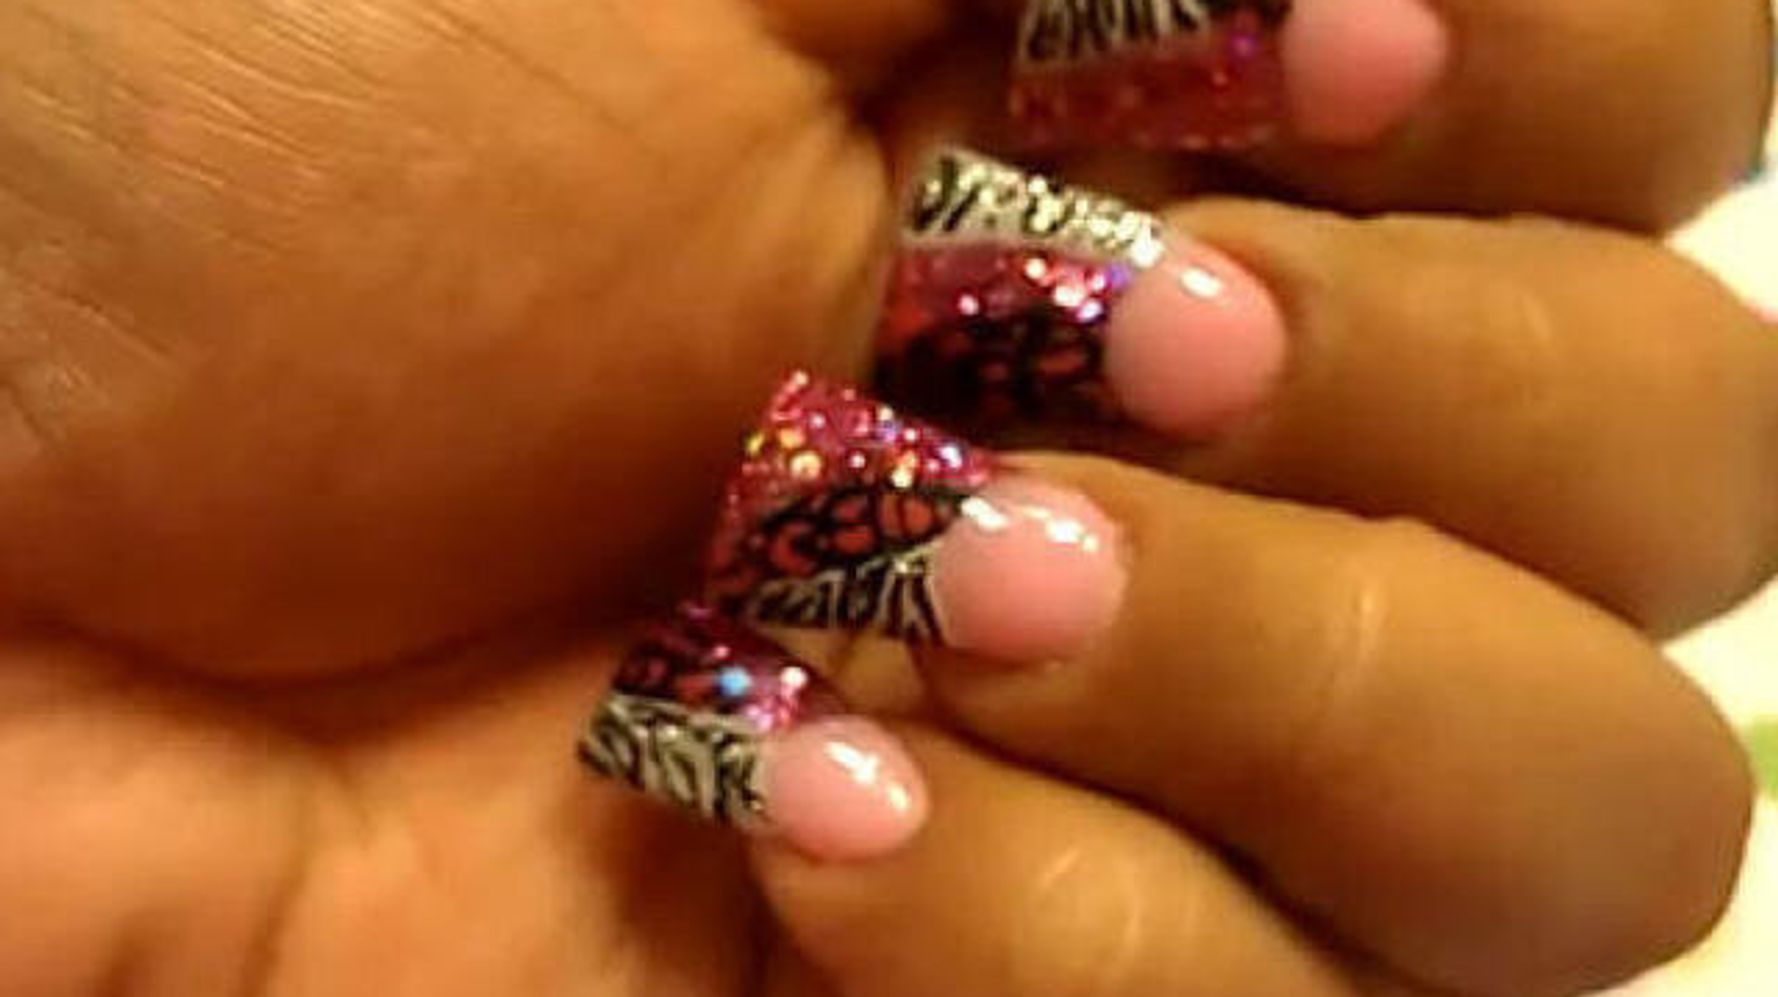 7. "The Most Disastrous Nail Art Fails You'll Ever Lay Eyes On" - wide 5